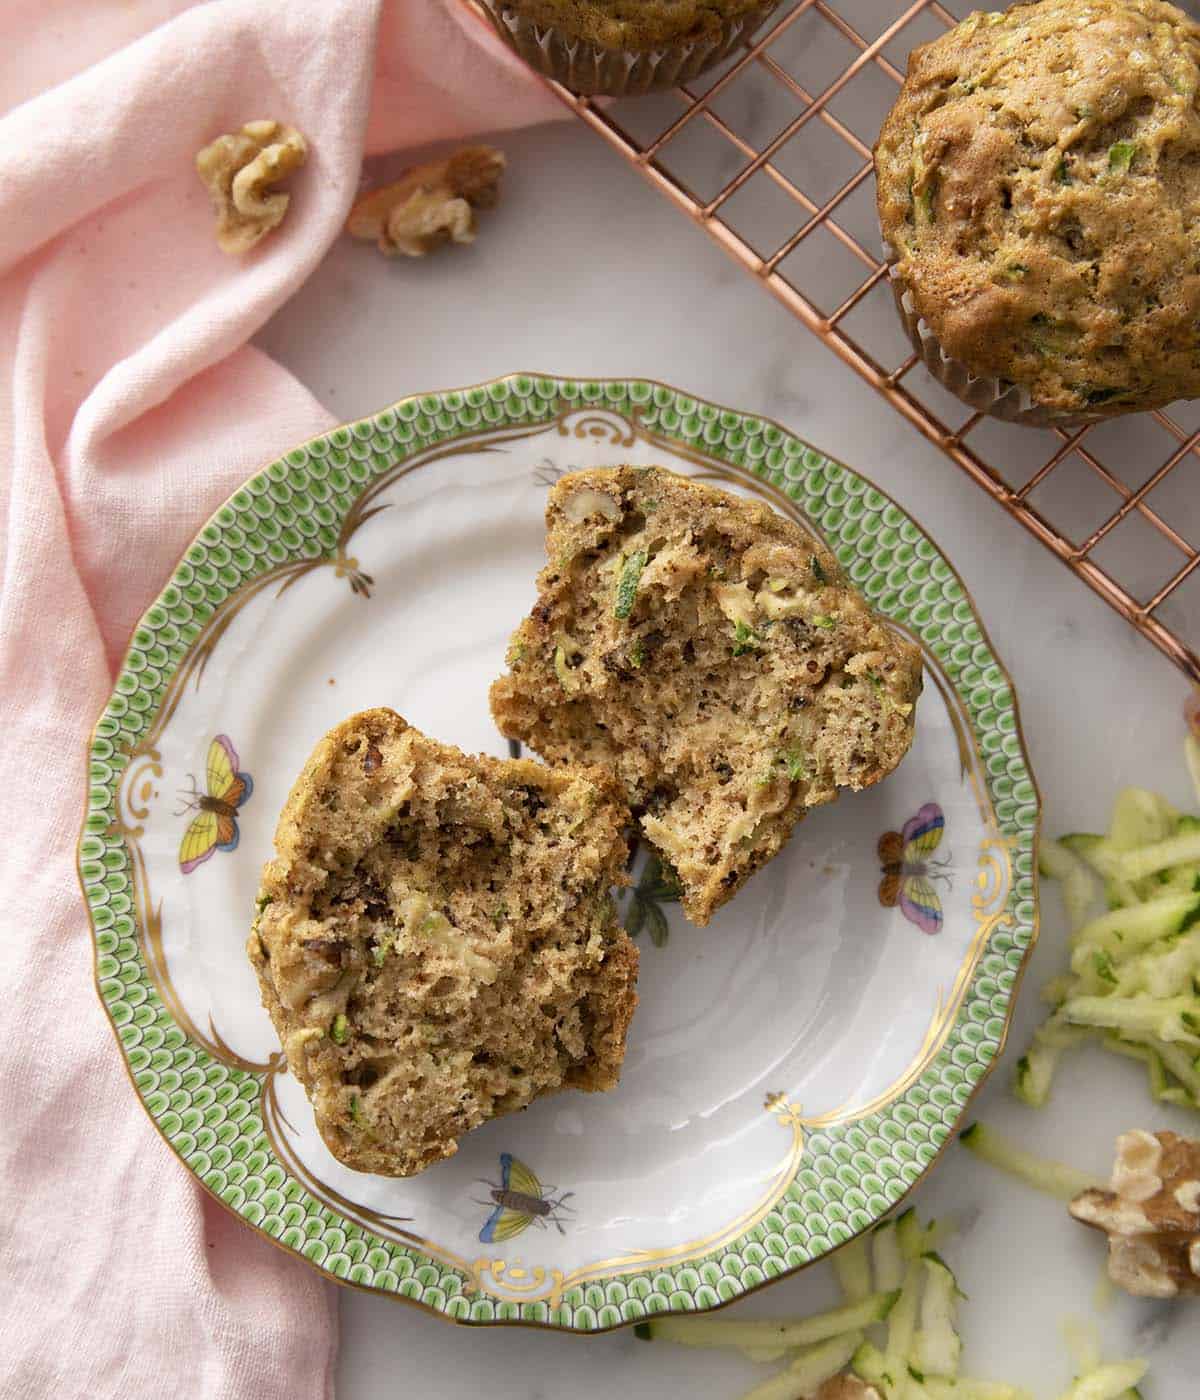 A zucchini muffin torn in half too show the delicious interior filled with walnuts.